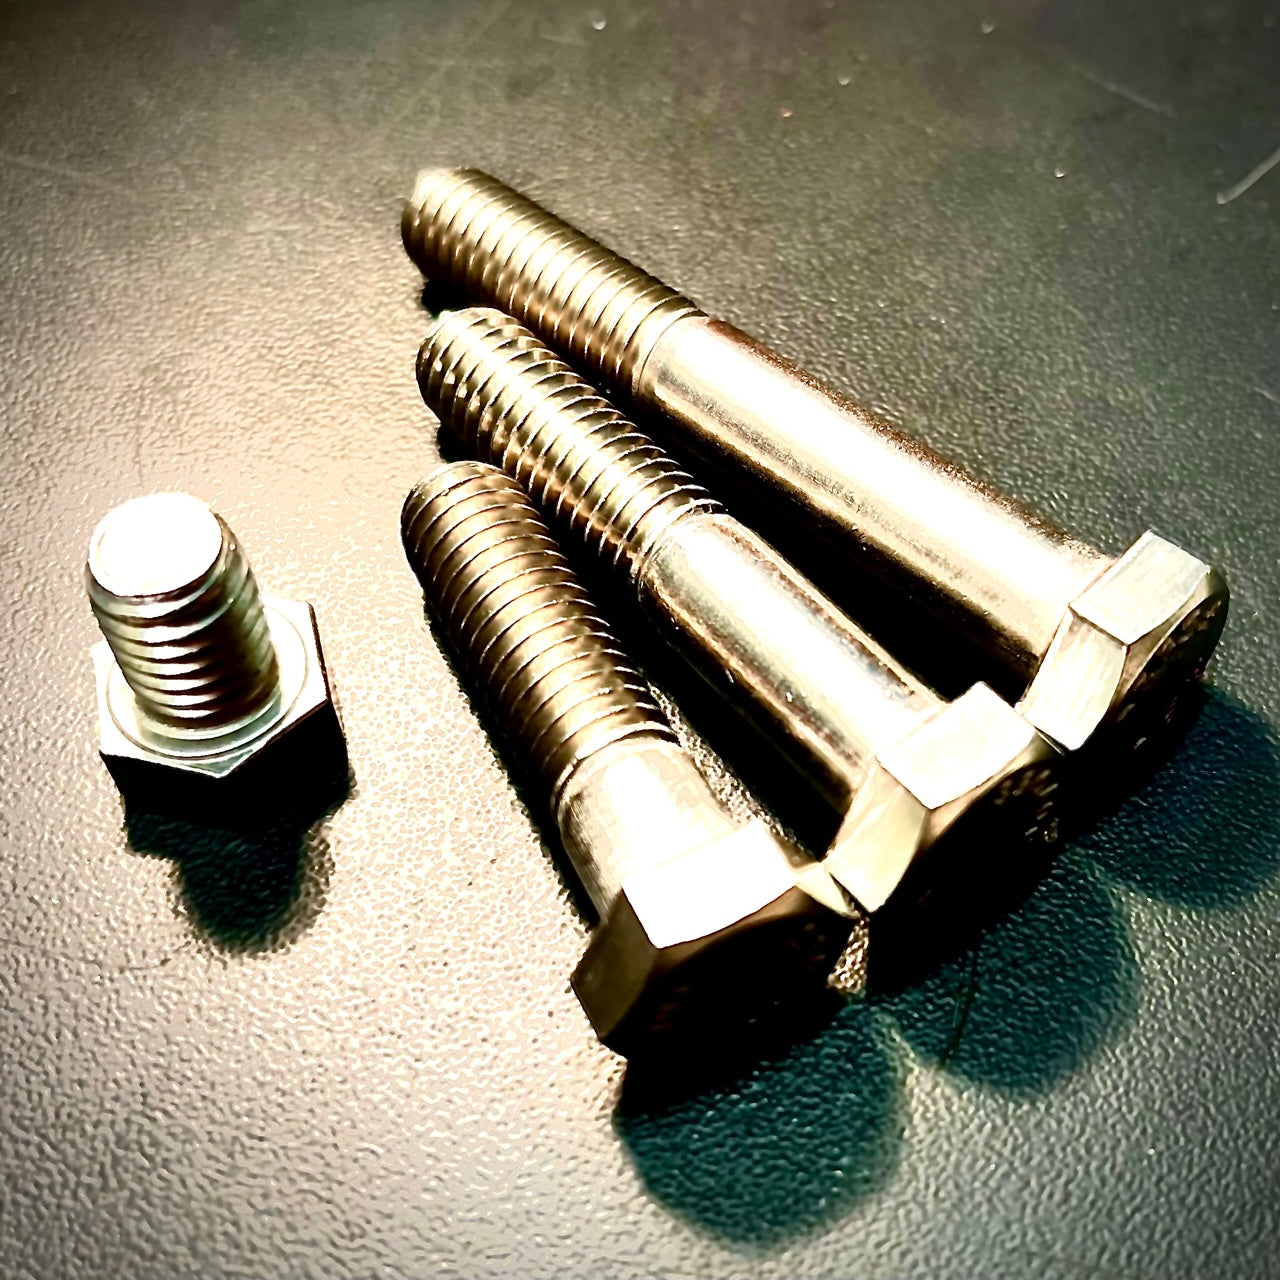 UNC 1/4" Hex Bolt and Set Screws A2 304 Stainless Steel DIN931 - Fixaball Ltd. Fixings and Fasteners UK